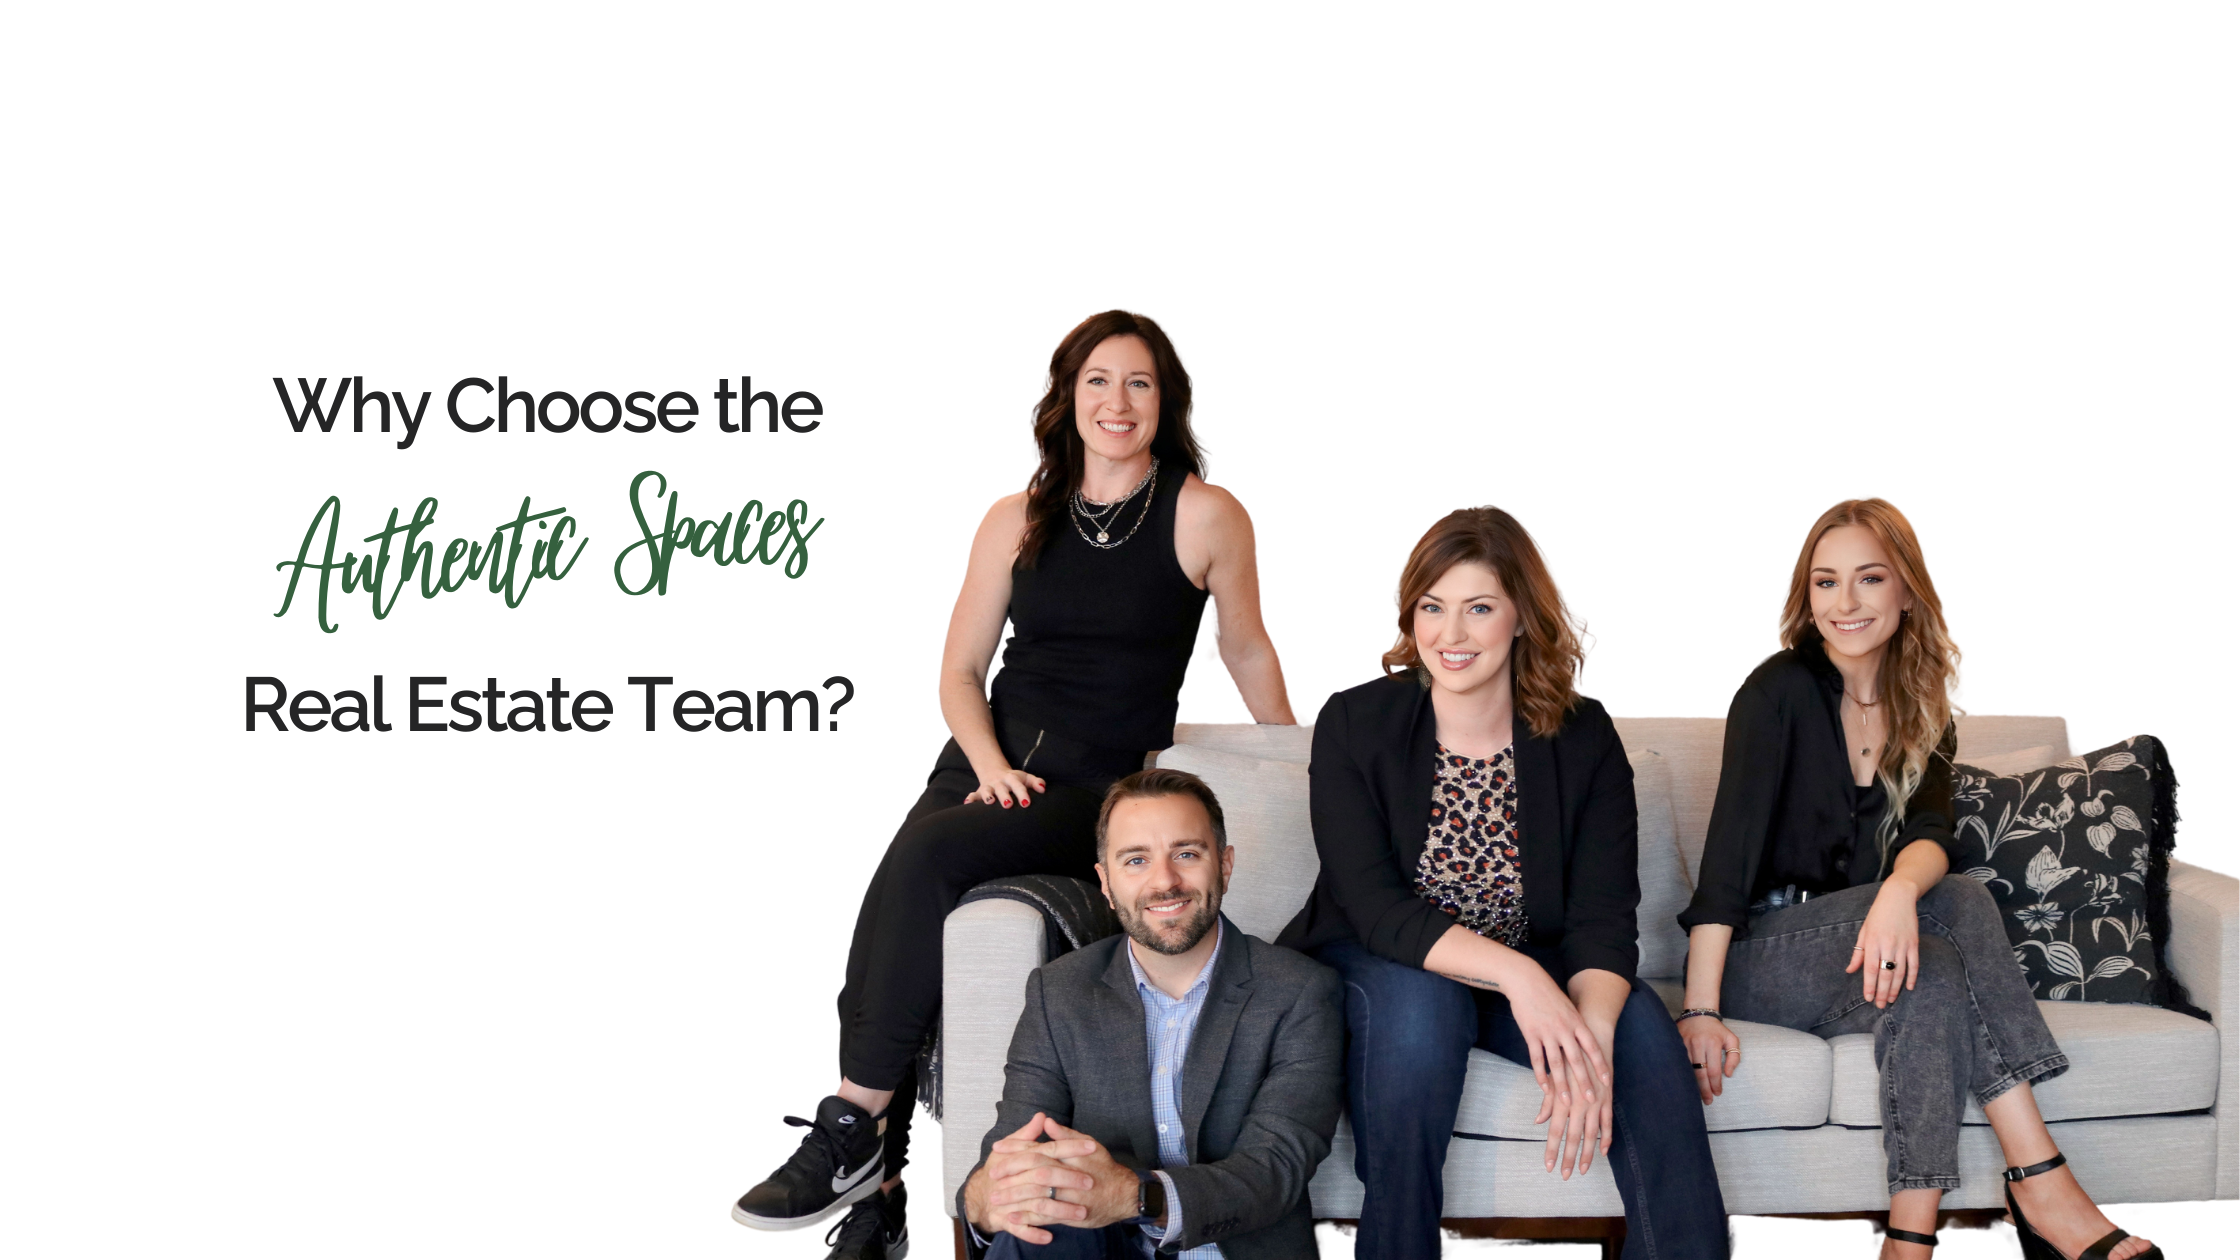 Why Choose The Authentic Spaces Real Estate Team